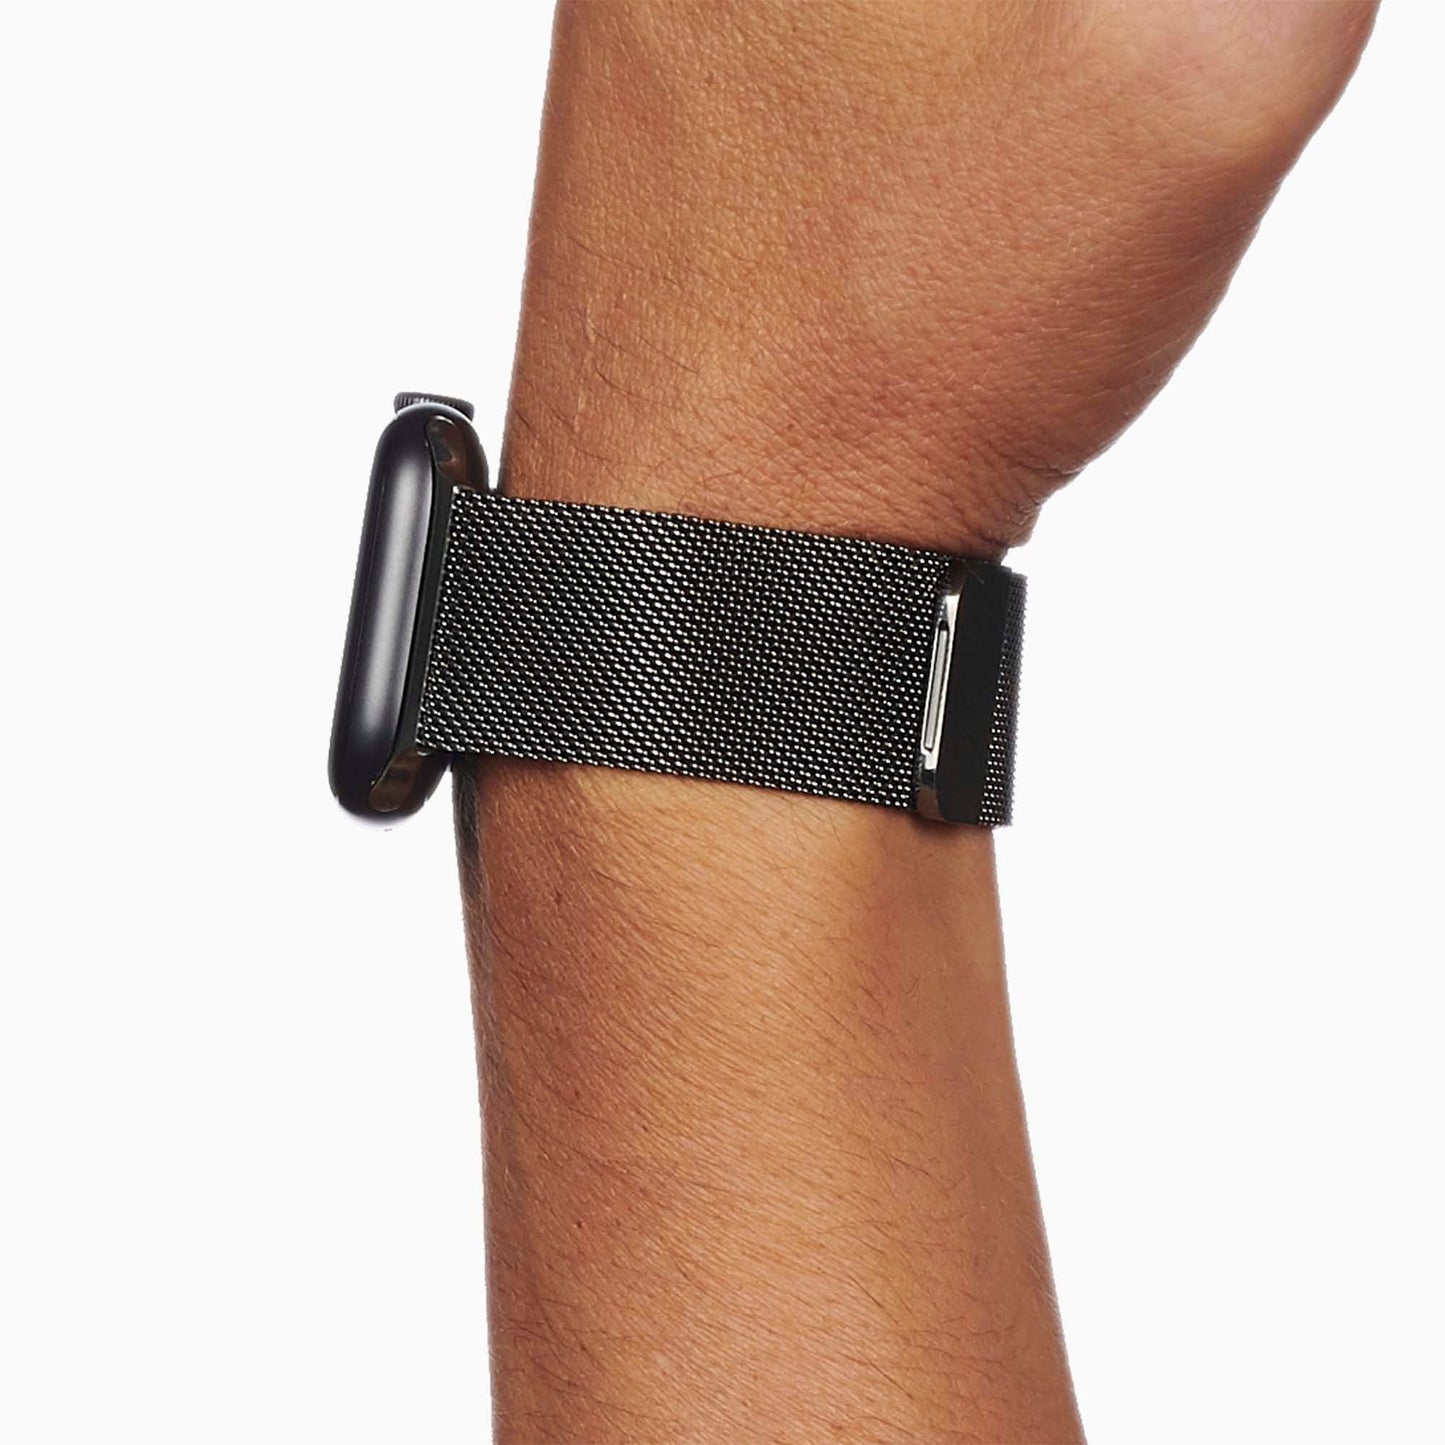 Graphite Milanese Loop for Apple Watch